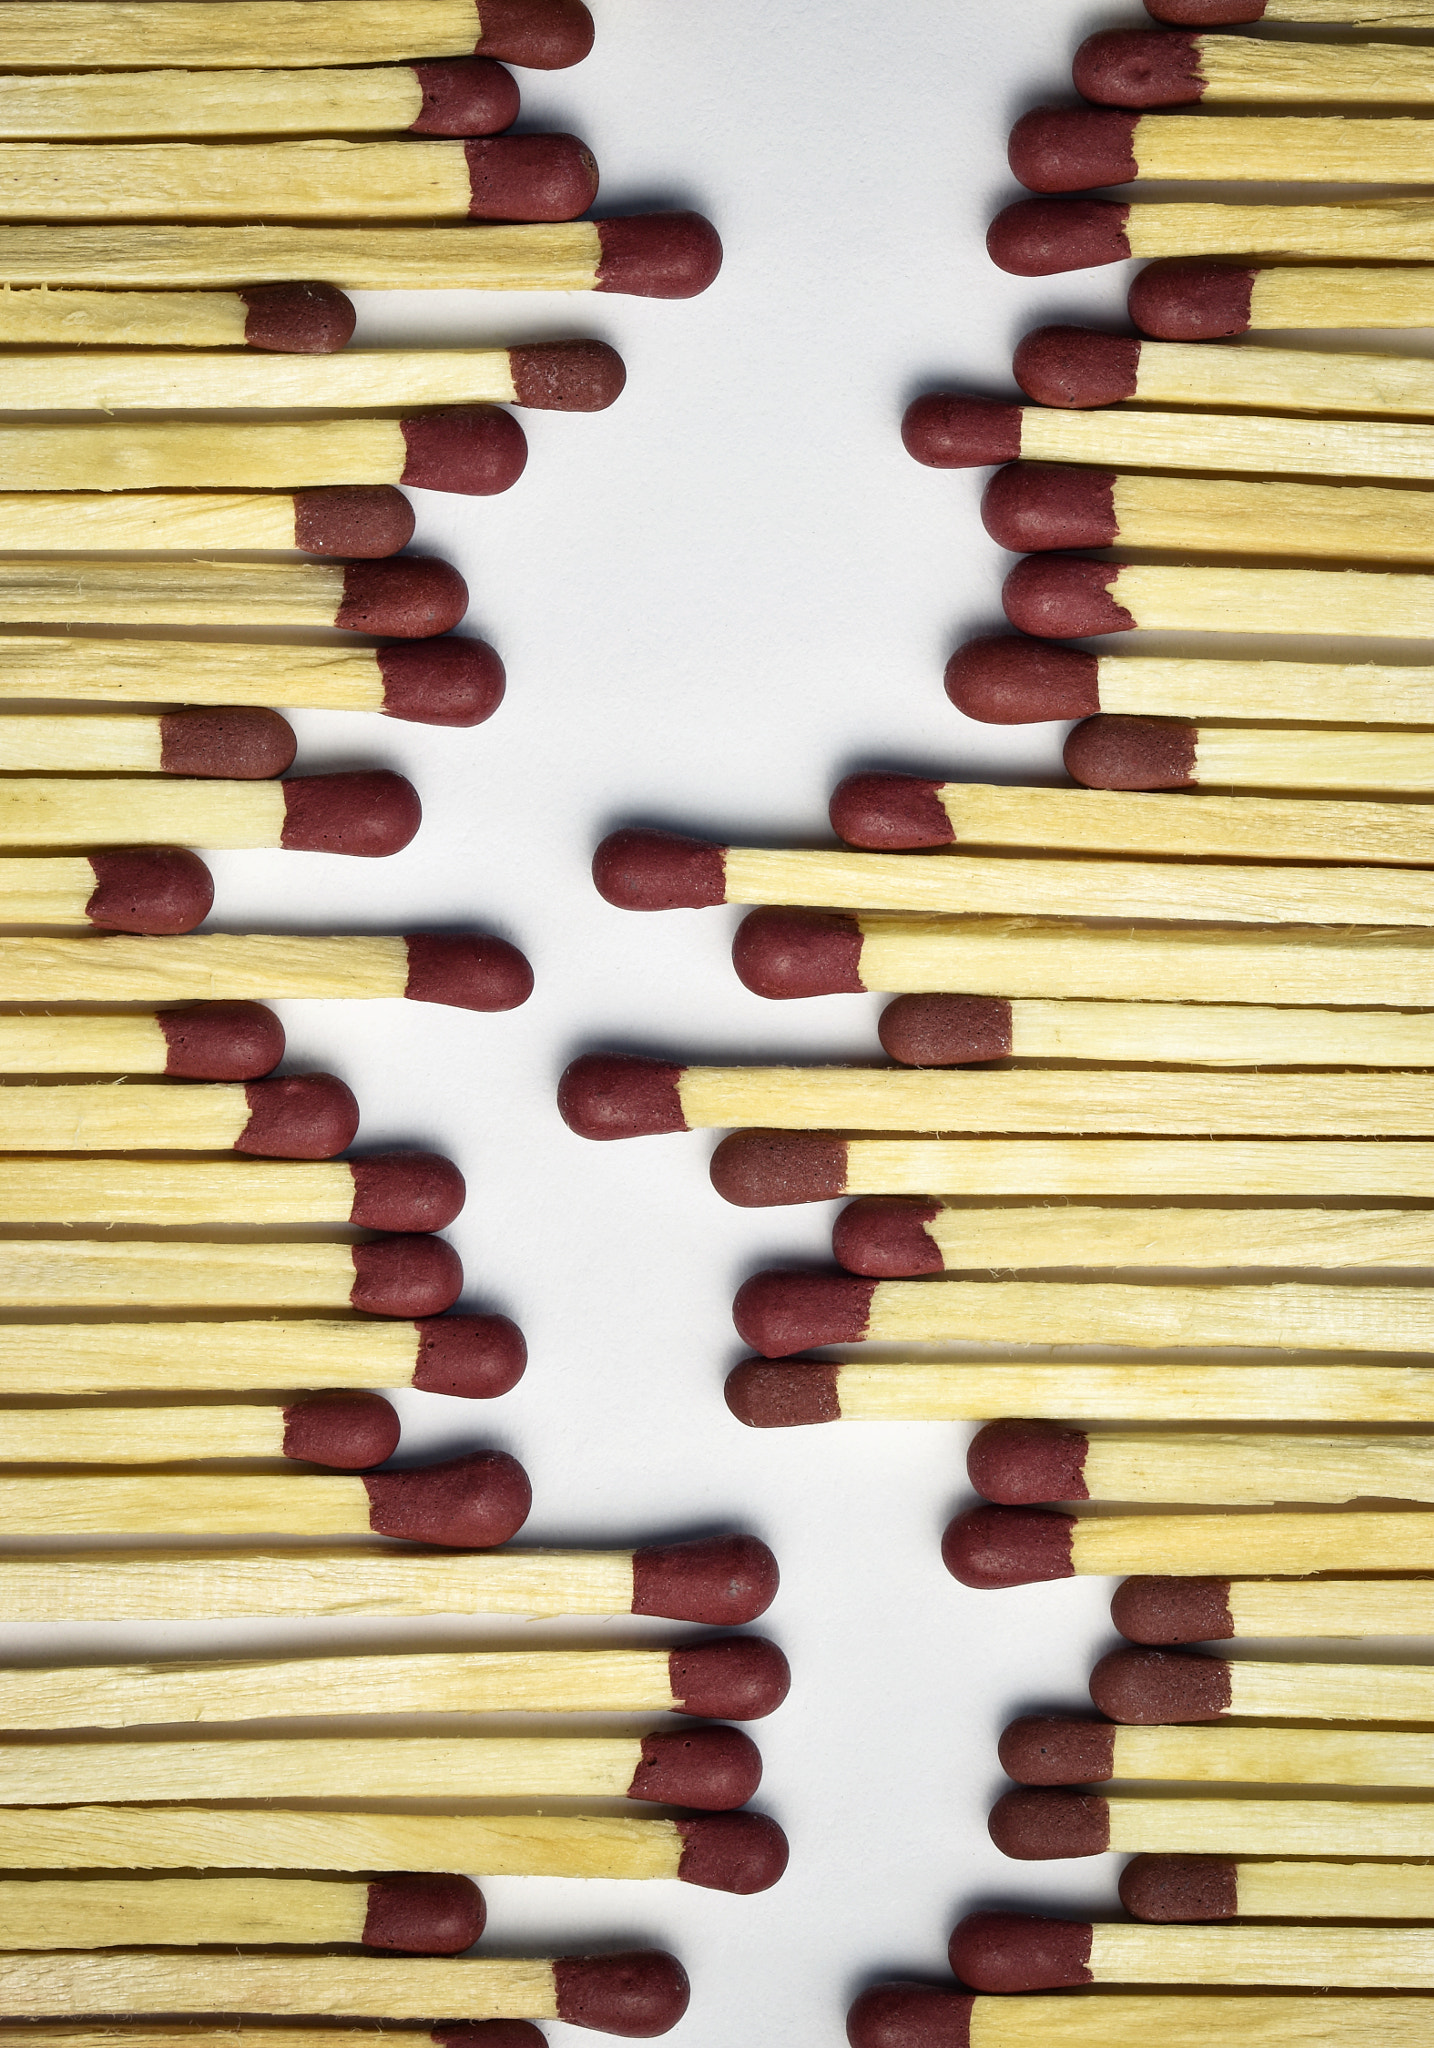 Nikon D5500 + Tamron SP 90mm F2.8 Di VC USD 1:1 Macro (F004) sample photo. A fictional path of of matches photography